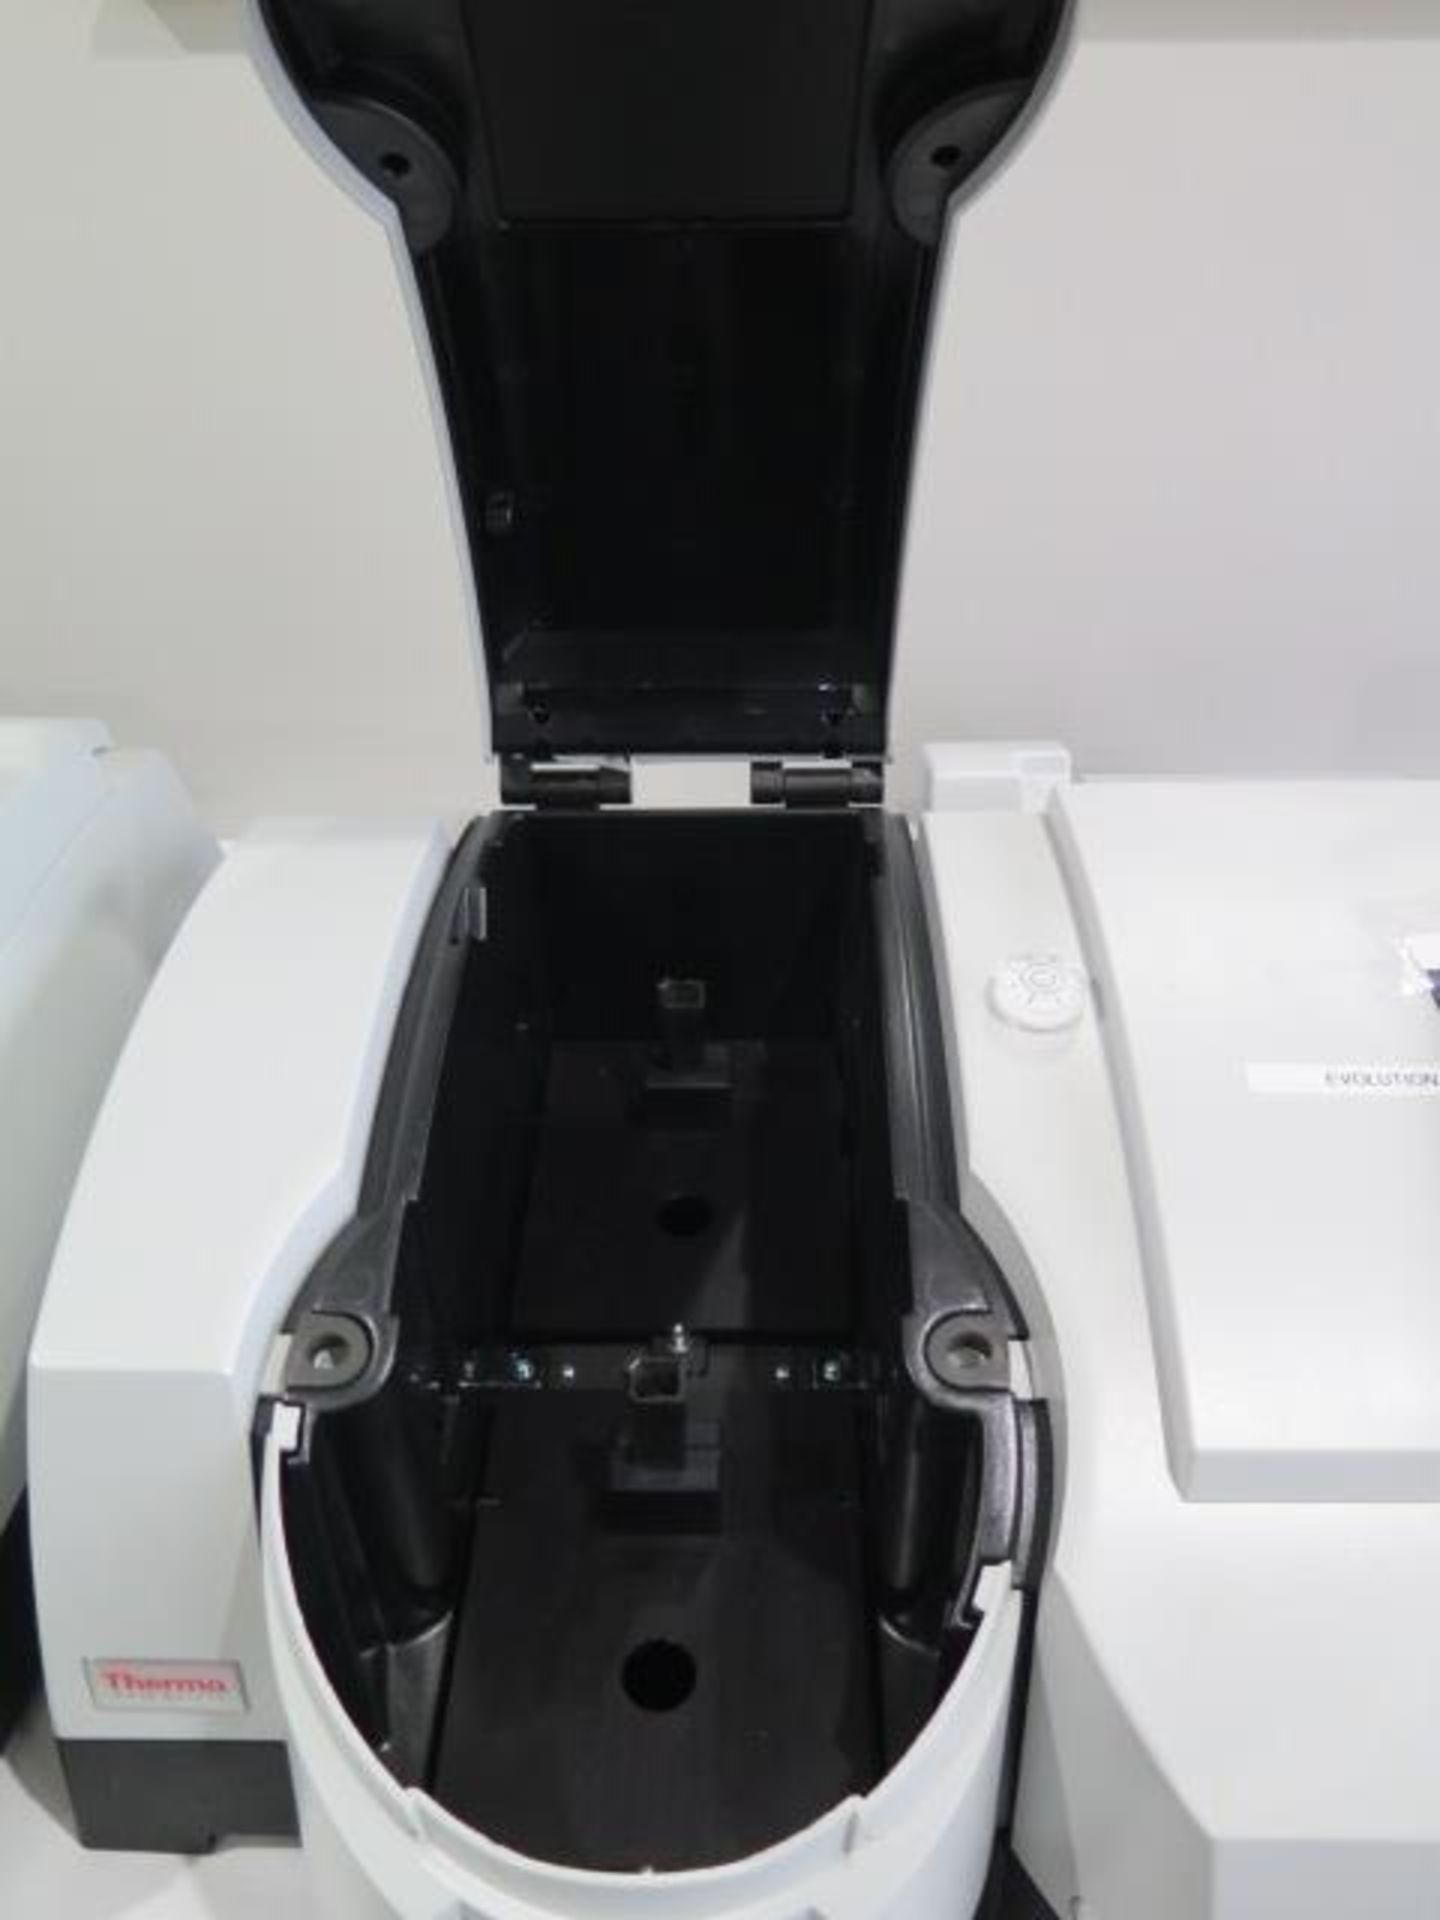 Thermo Scientific Evolution 300 UV-VIS Spectrophotometer s/n EVOU308001 (SOLD AS-IS - NO WARRANTY) - Image 4 of 8